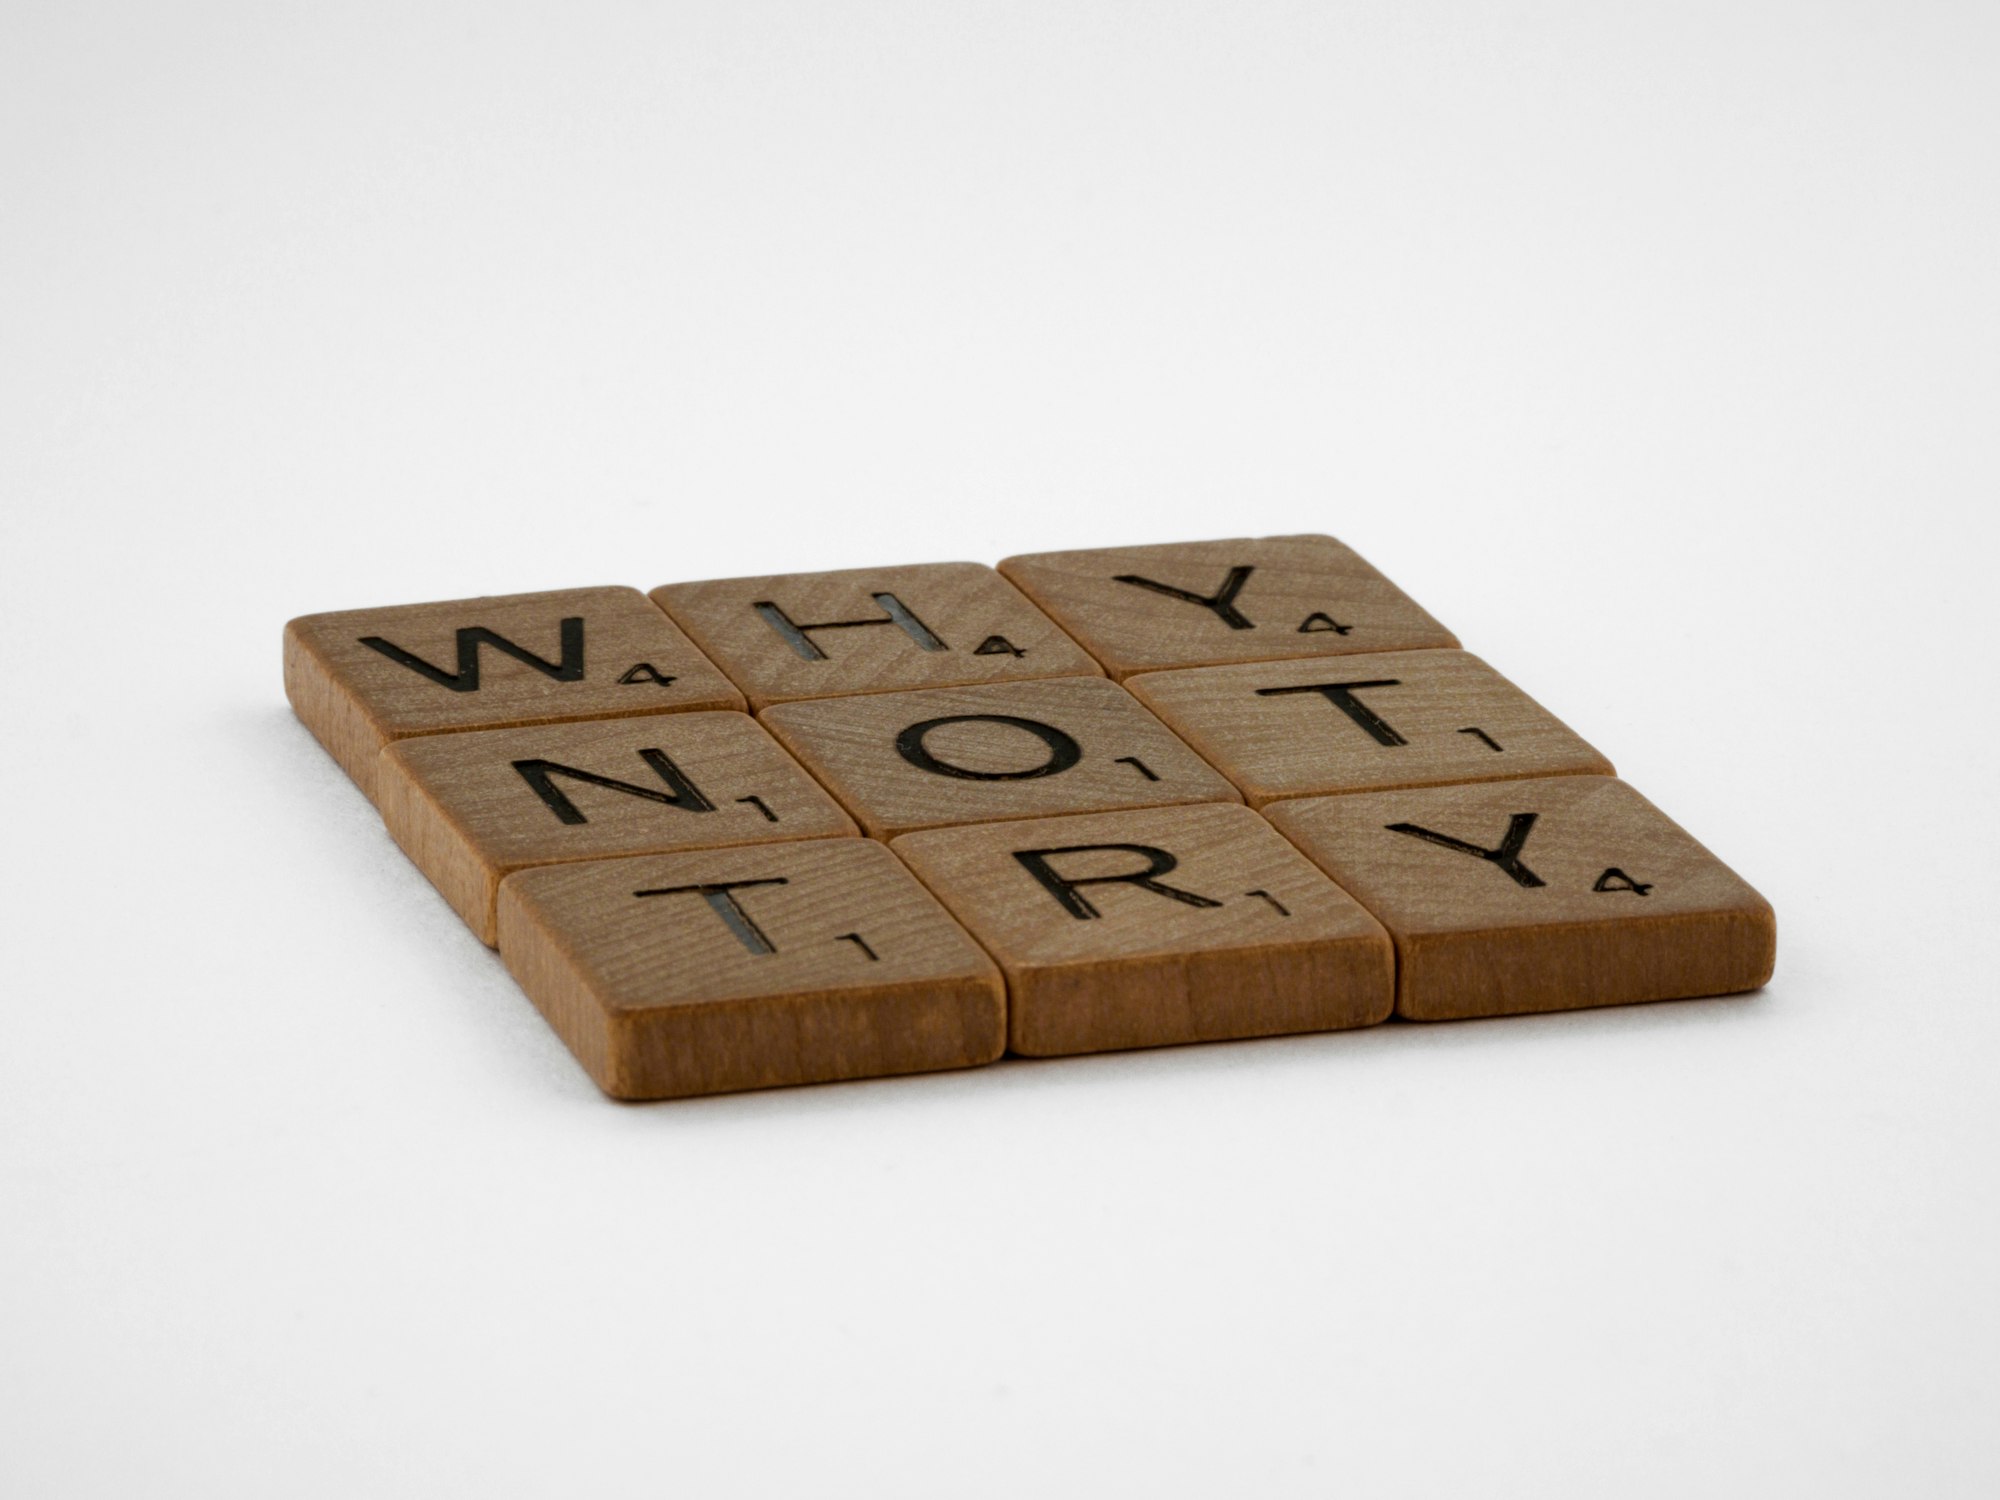 scrabble, scrabble pieces, lettering, letters, wood, scrabble tiles, white background, words, quote, letters, type, typography, design, layout, focus, bokeh, blur, photography, images, image, try, go for it, just do it, don't give up, keep going, one foot in front of the other, if not now when, procrastination, determination, motivation, 